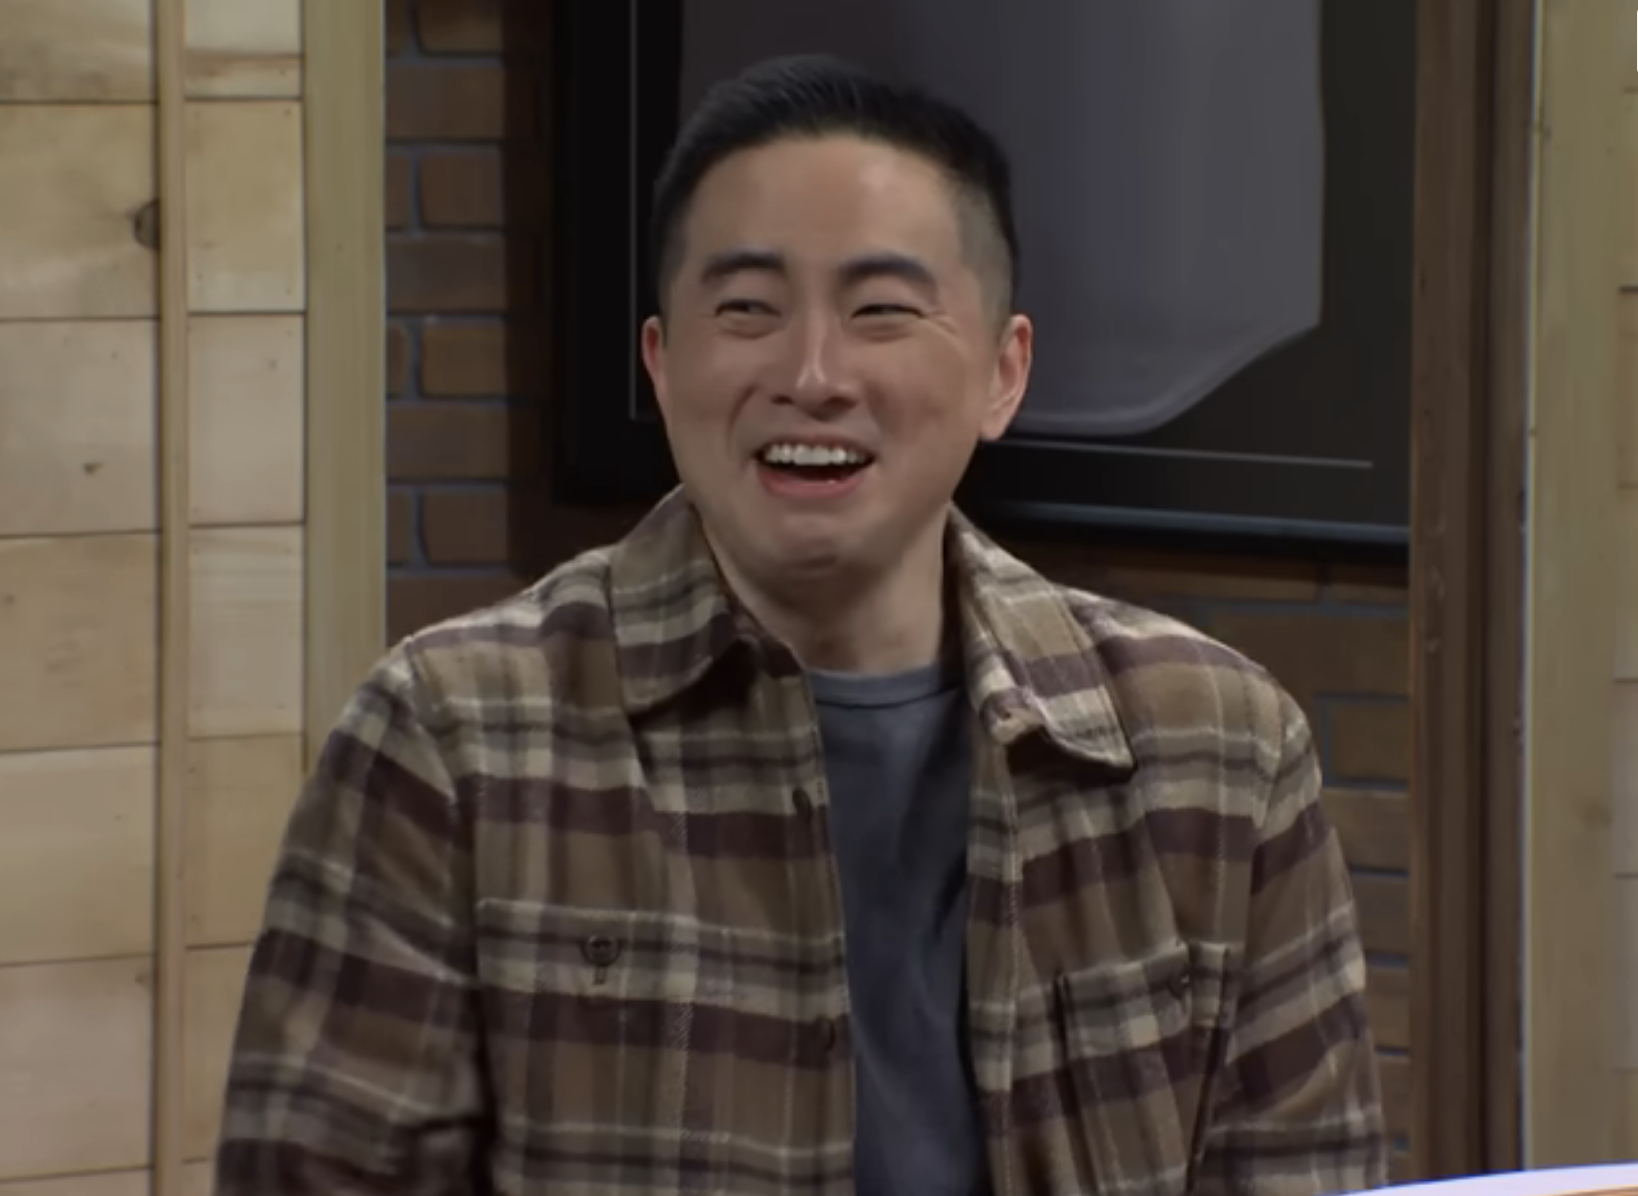 Man in a plaid shirt smiles sitting at a table, in a comedy skit setting